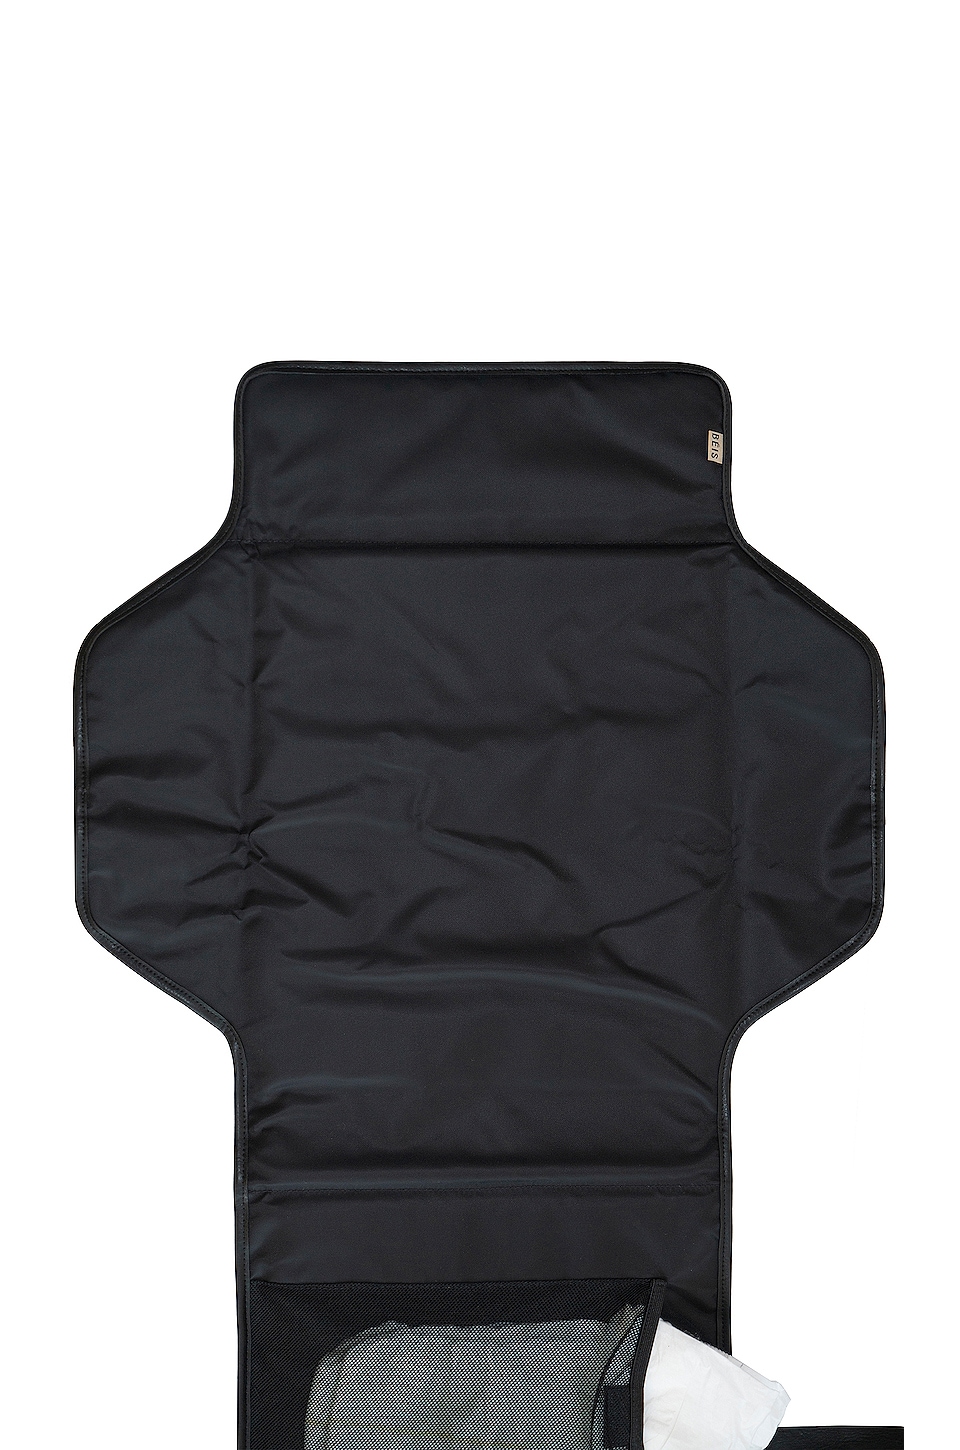 BEIS Travel Changing Pad in Black